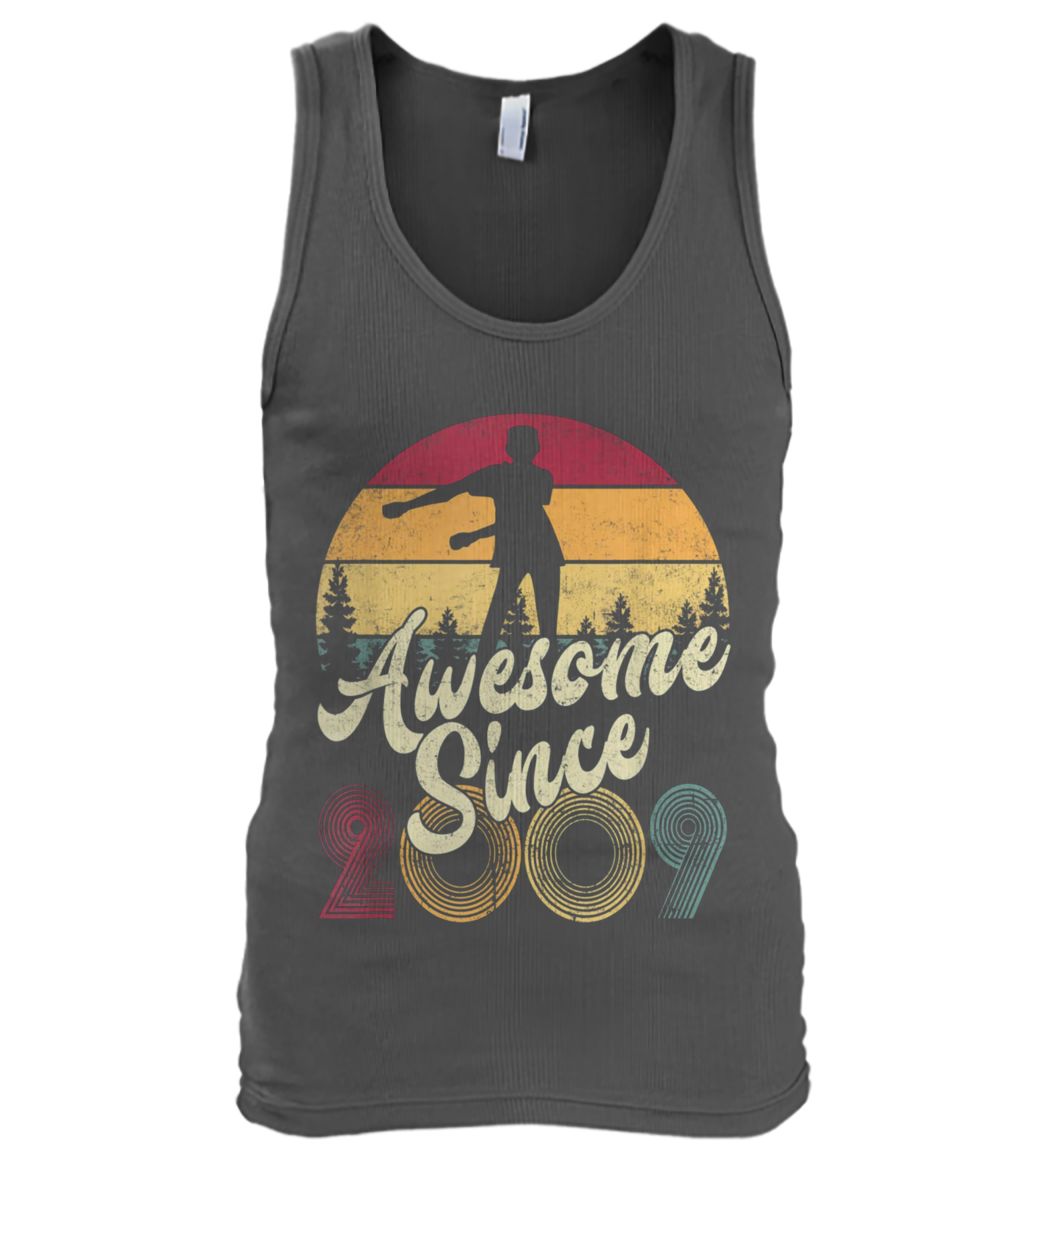 10th birthday awesome since 2009 floss like a boss men's tank top